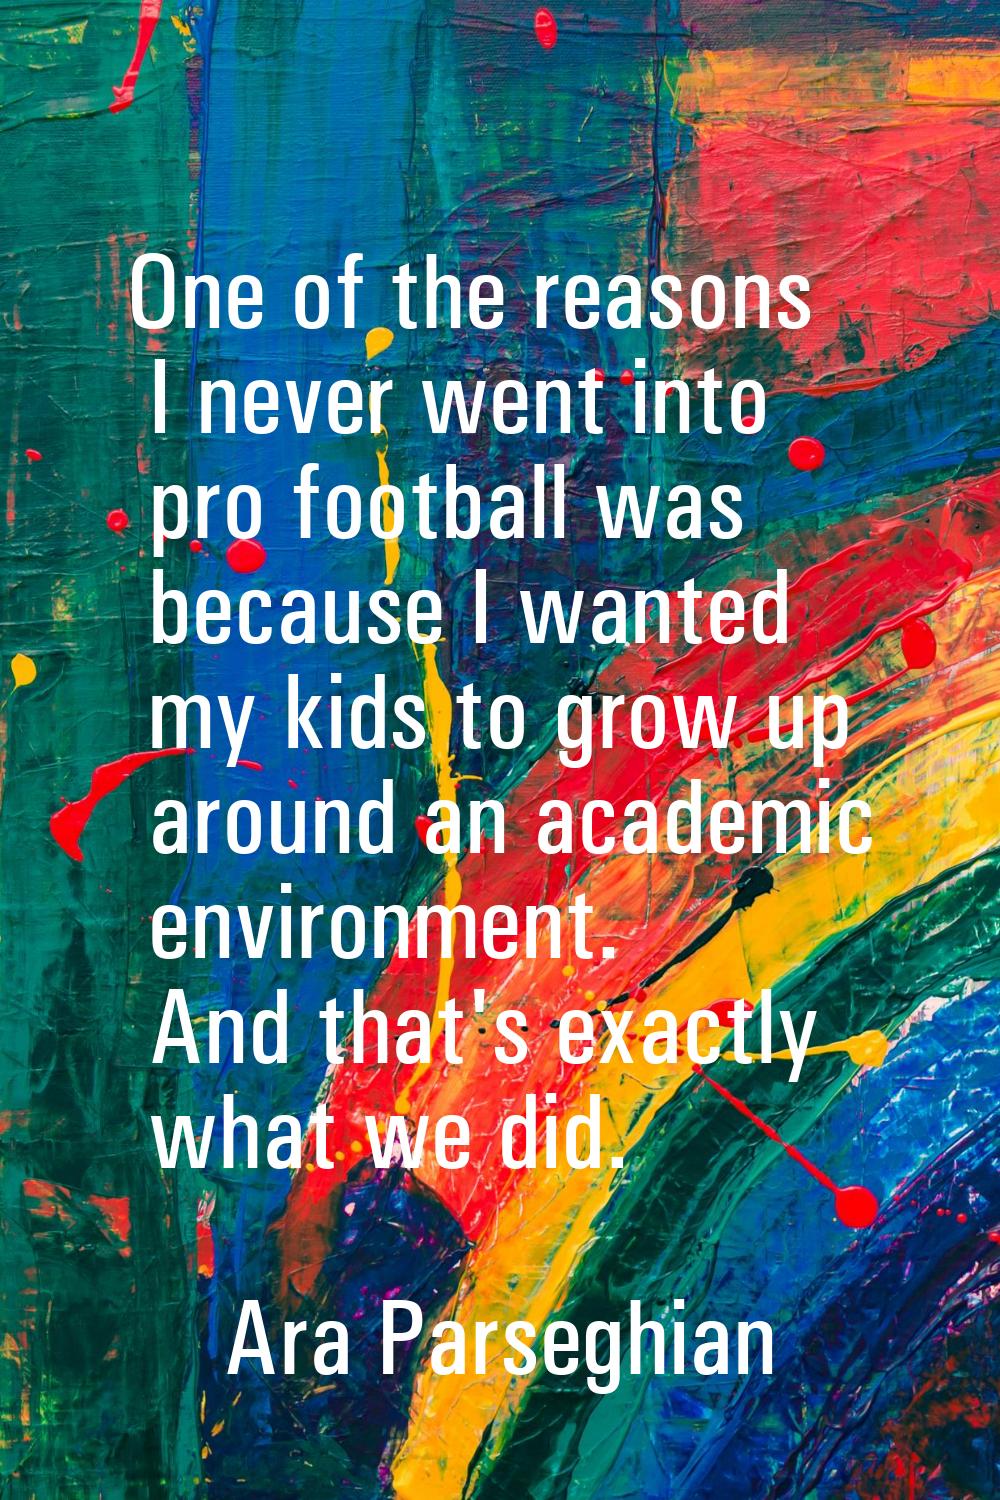 One of the reasons I never went into pro football was because I wanted my kids to grow up around an